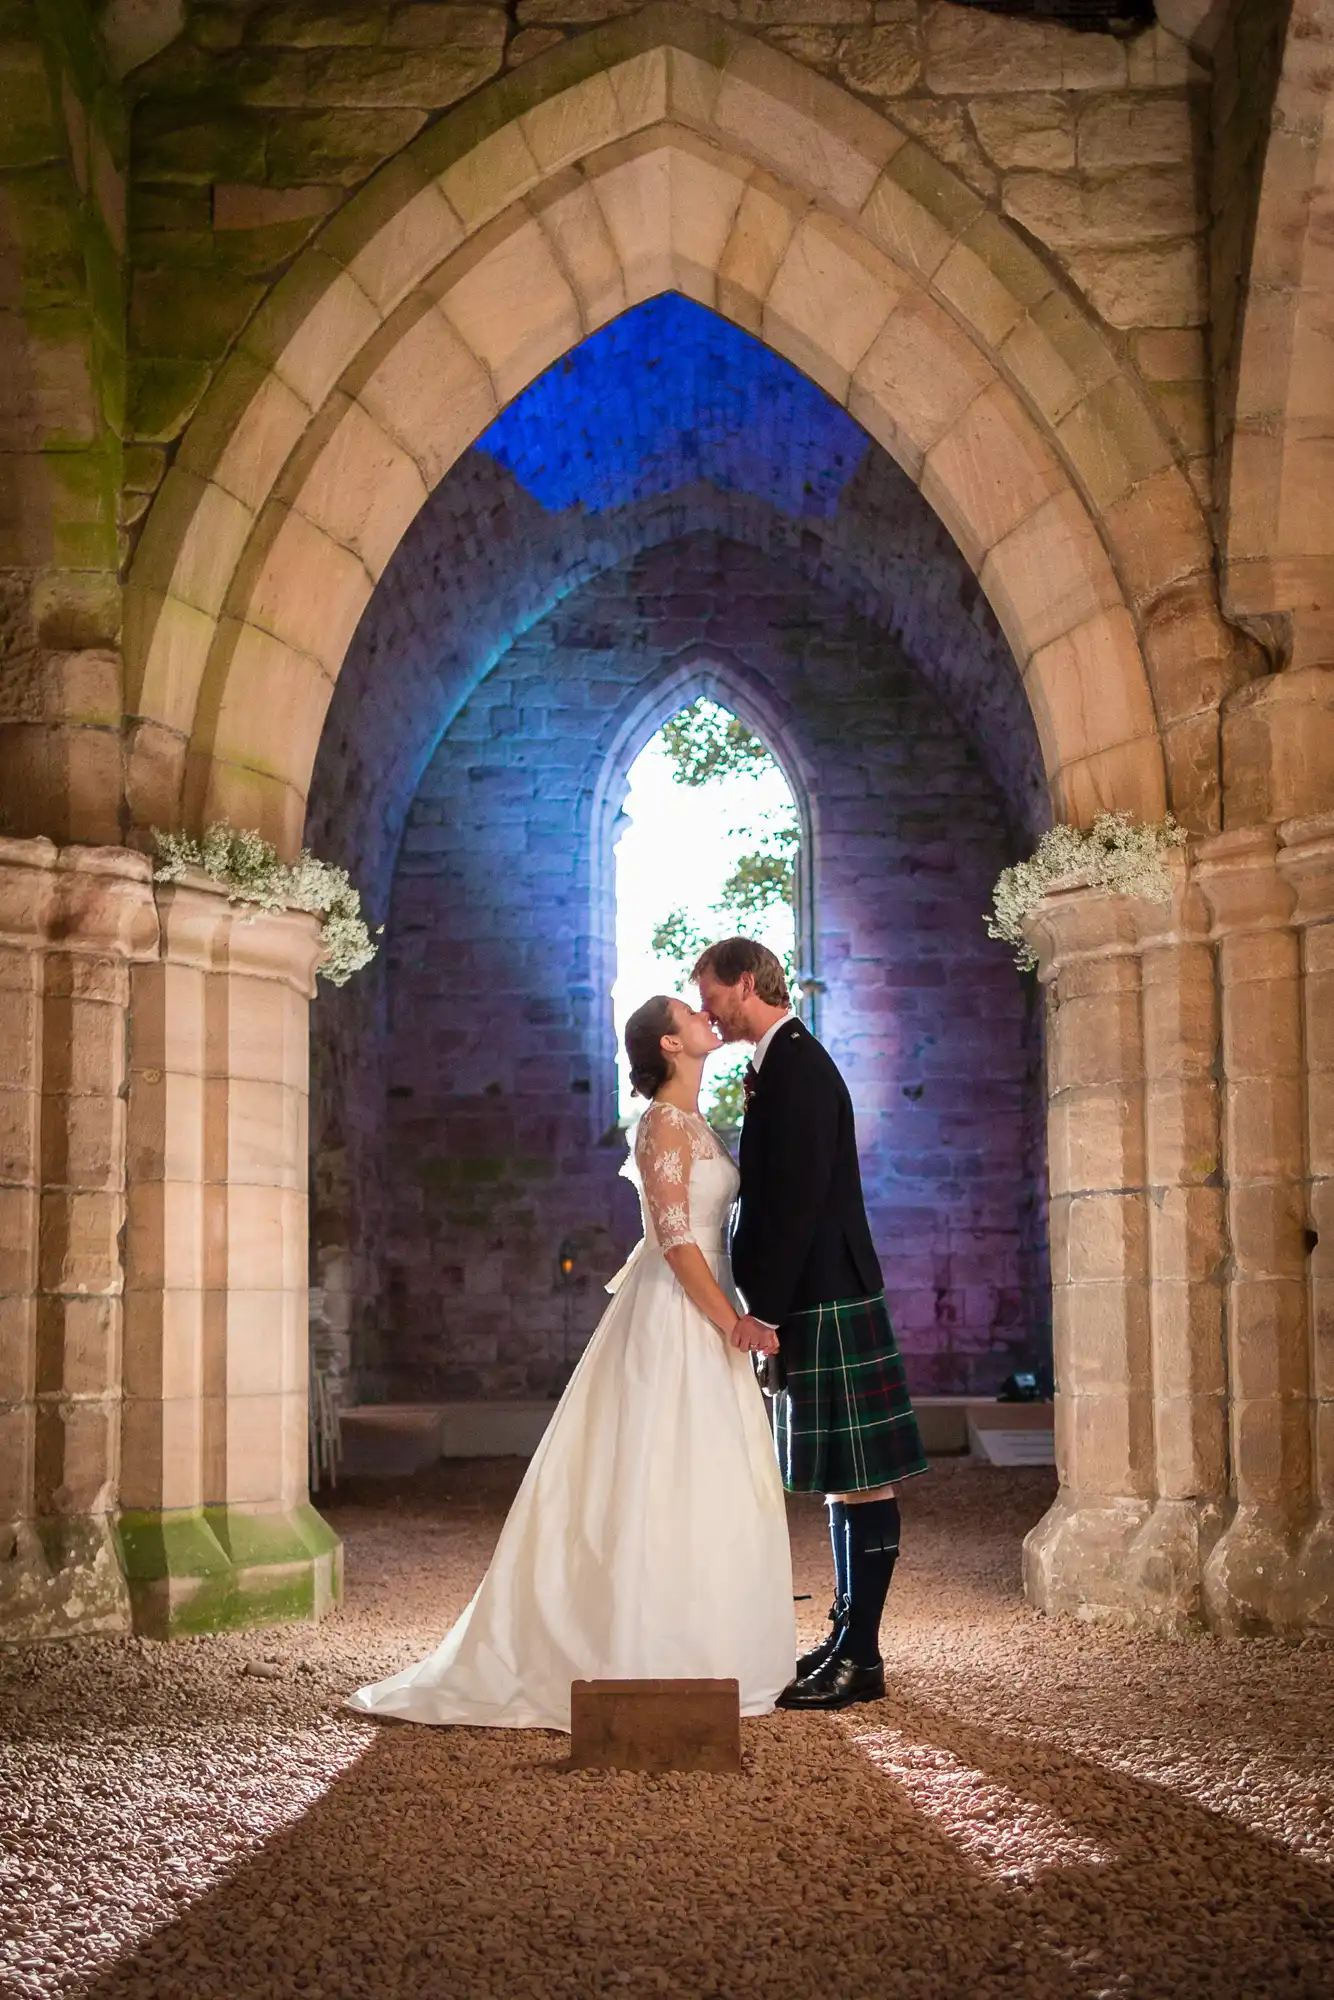 Bride and groom sharing a kiss inside a stone archway, the groom wearing a kilt, illuminated by warm lighting with a blue window in the background.